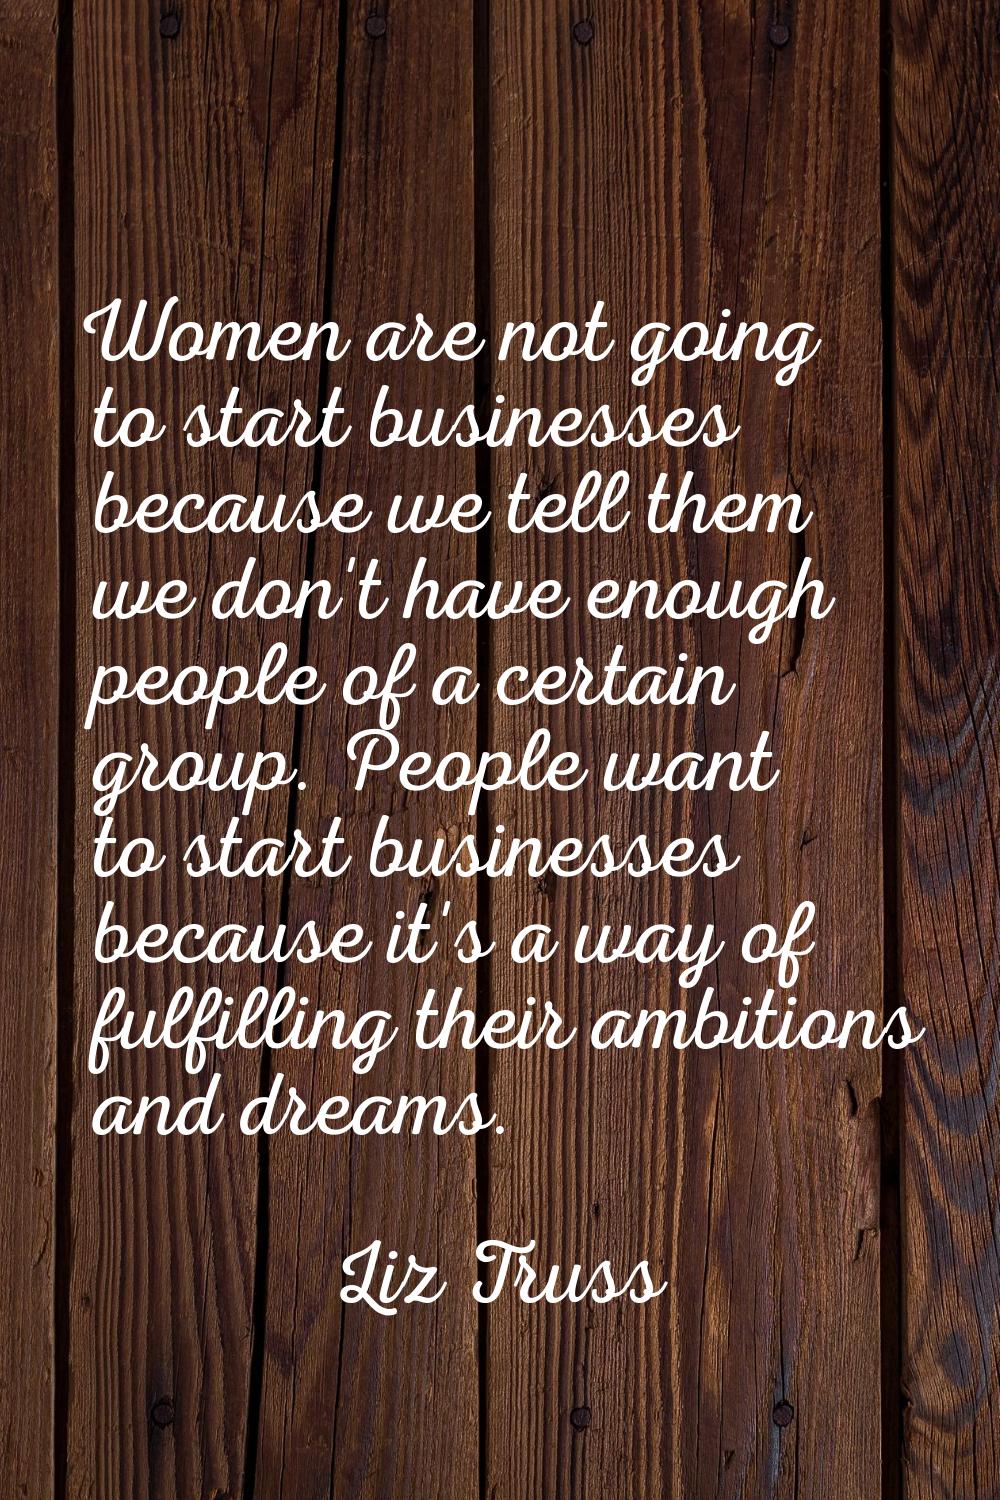 Women are not going to start businesses because we tell them we don't have enough people of a certa